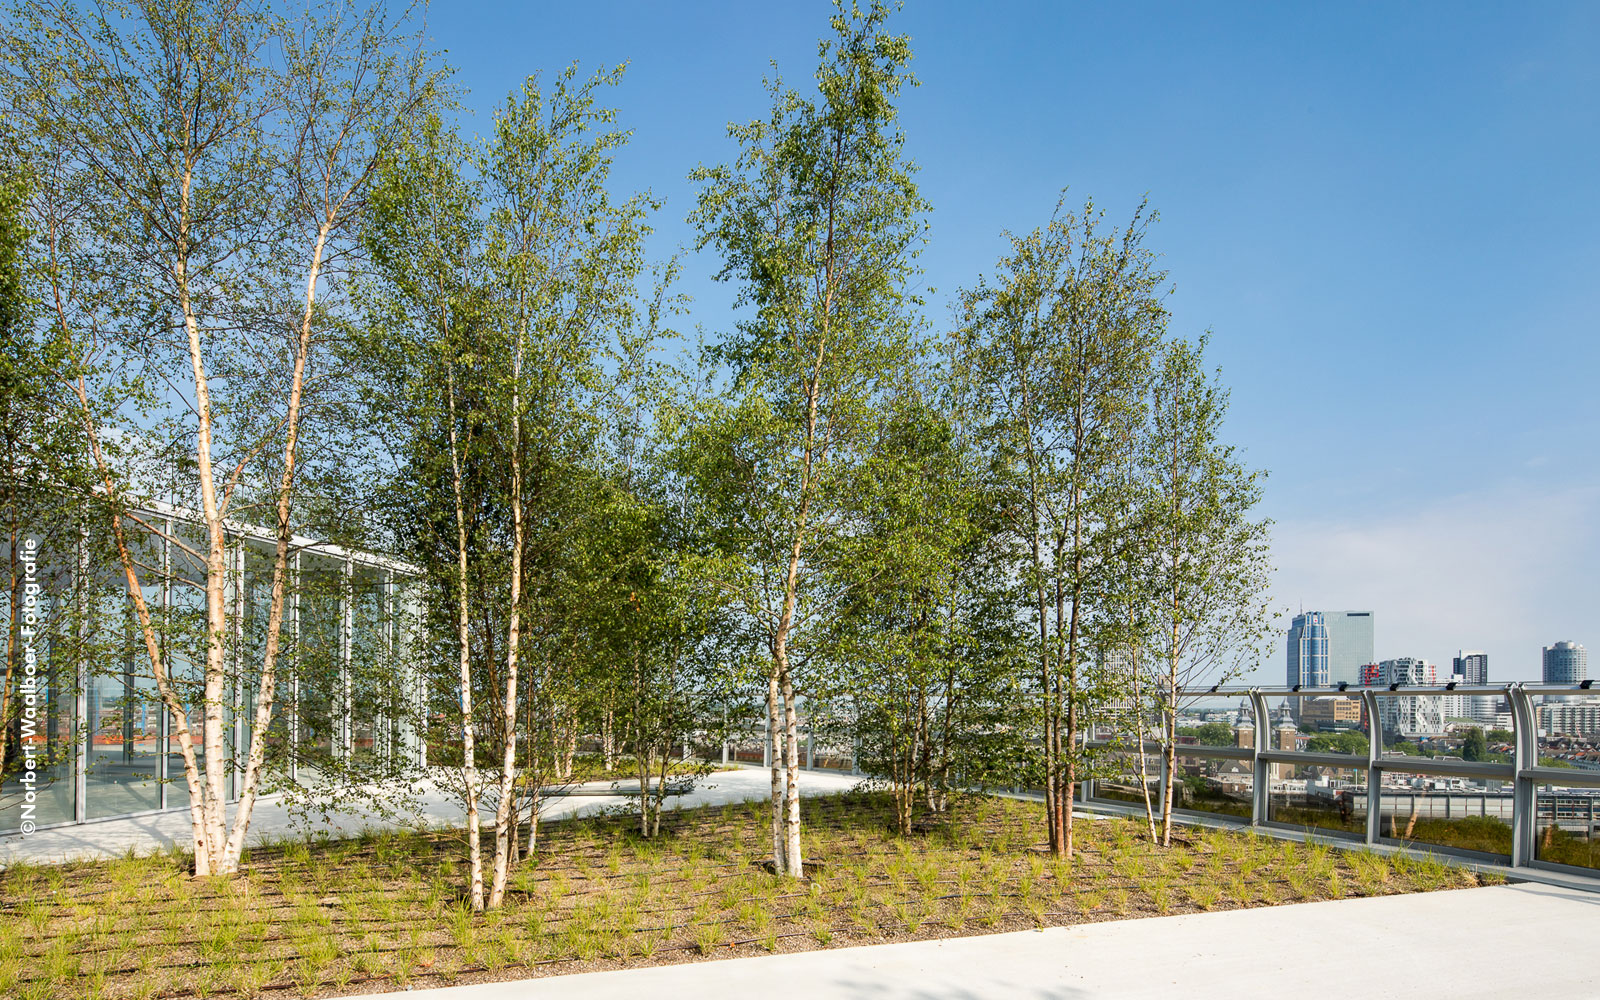 Roof garden with Birch trees and water system pipes